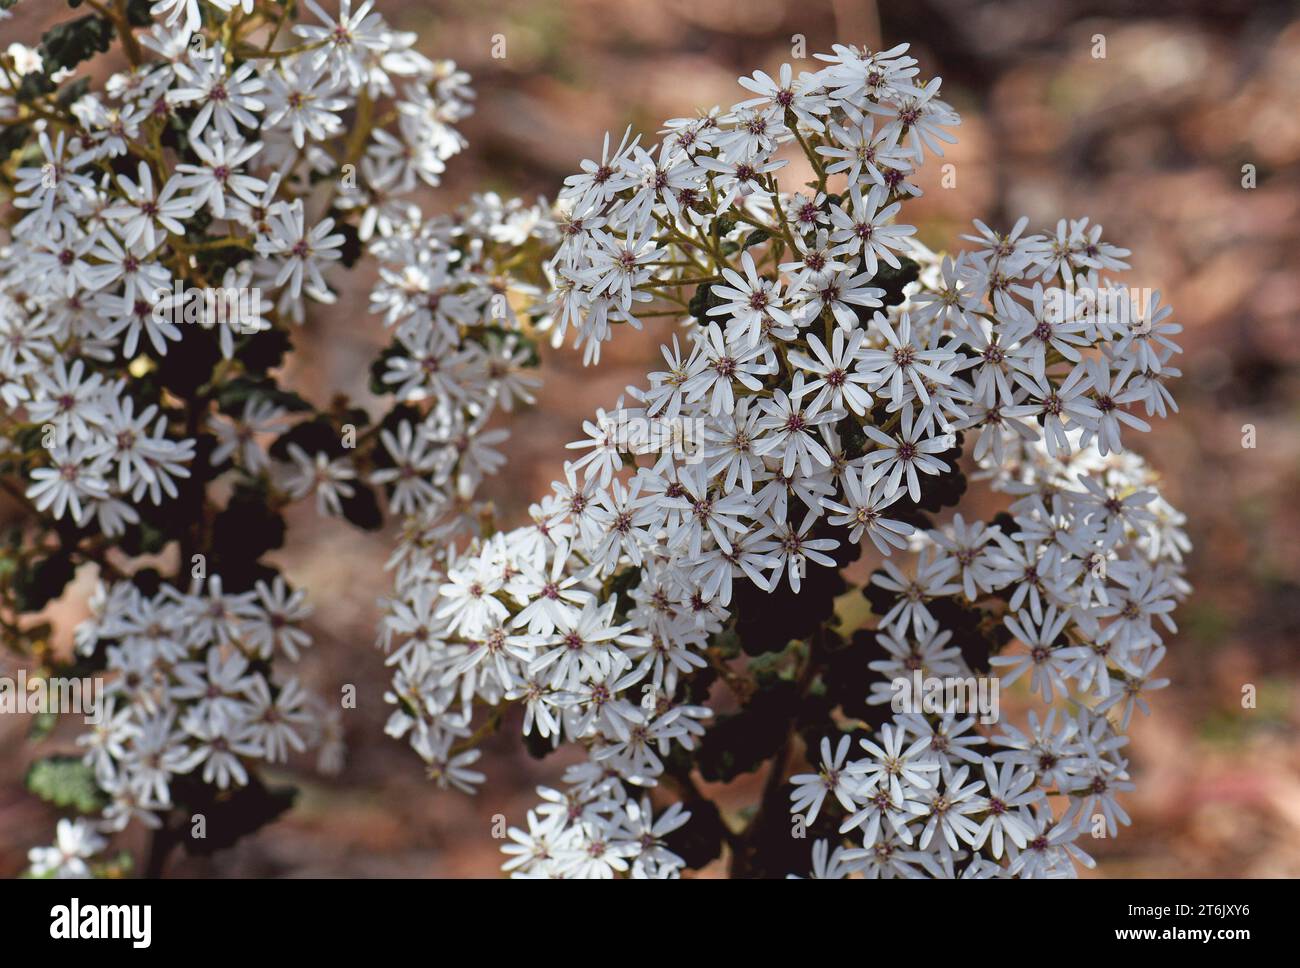 White flowers of the Australian native Wrinkled Daisy Bush Olearia rugosa, family Asteraceae. Subspecies allenderae considered endangered Stock Photo